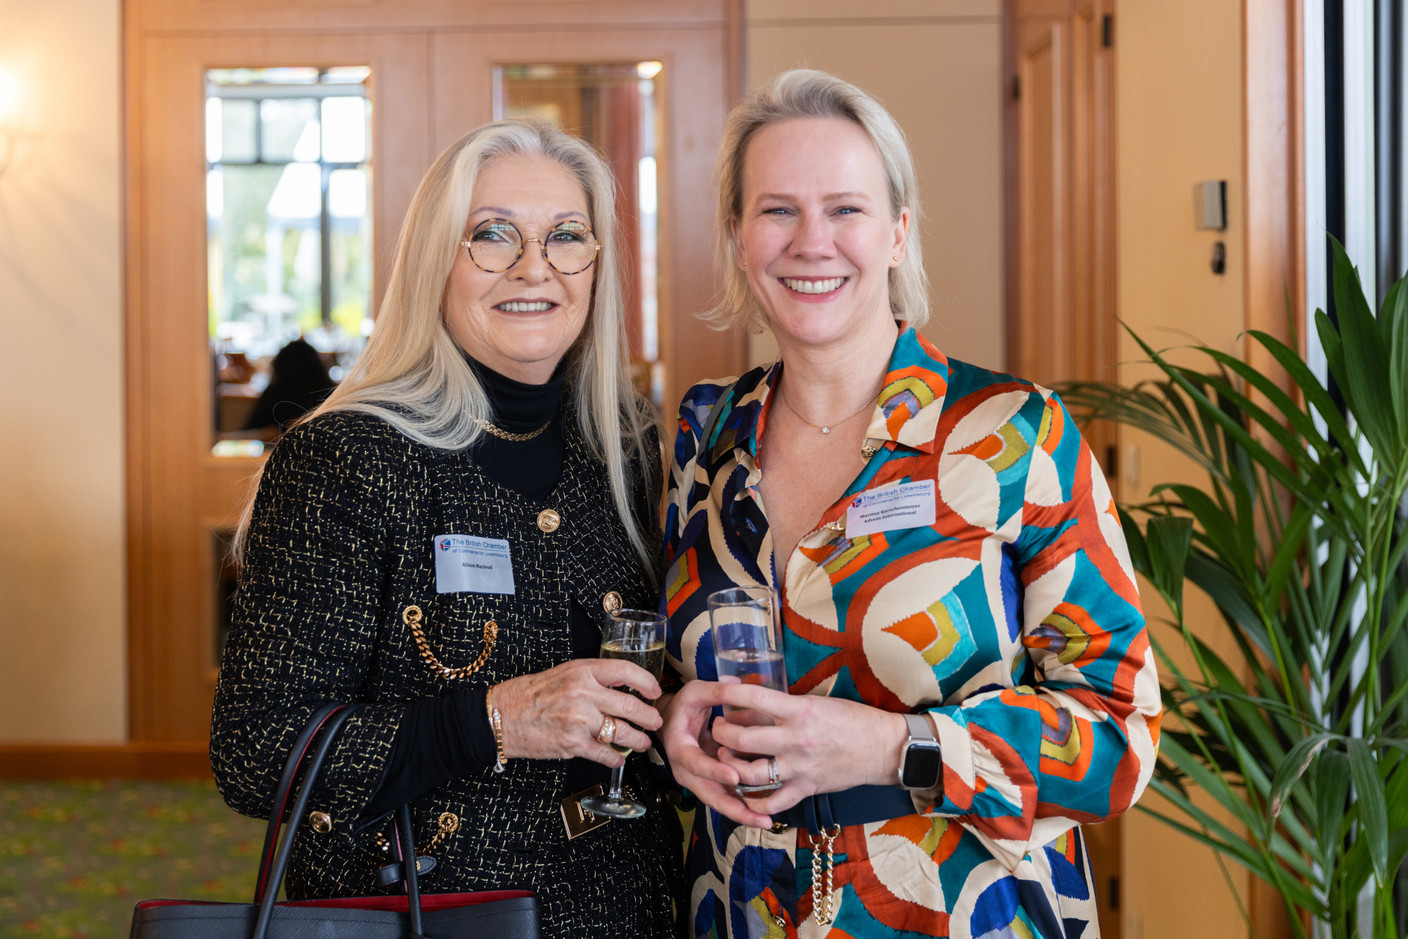 (l-r) Alison Macleod, head of real estate services at KPMG Luxembourg, with Martine Kerschenmeyer, director limited partner services at Advent International, at the BCC & Amcham Personal Tax Lunch on 21 November 2023. Photo: Romain Gamba / Maison Moderne